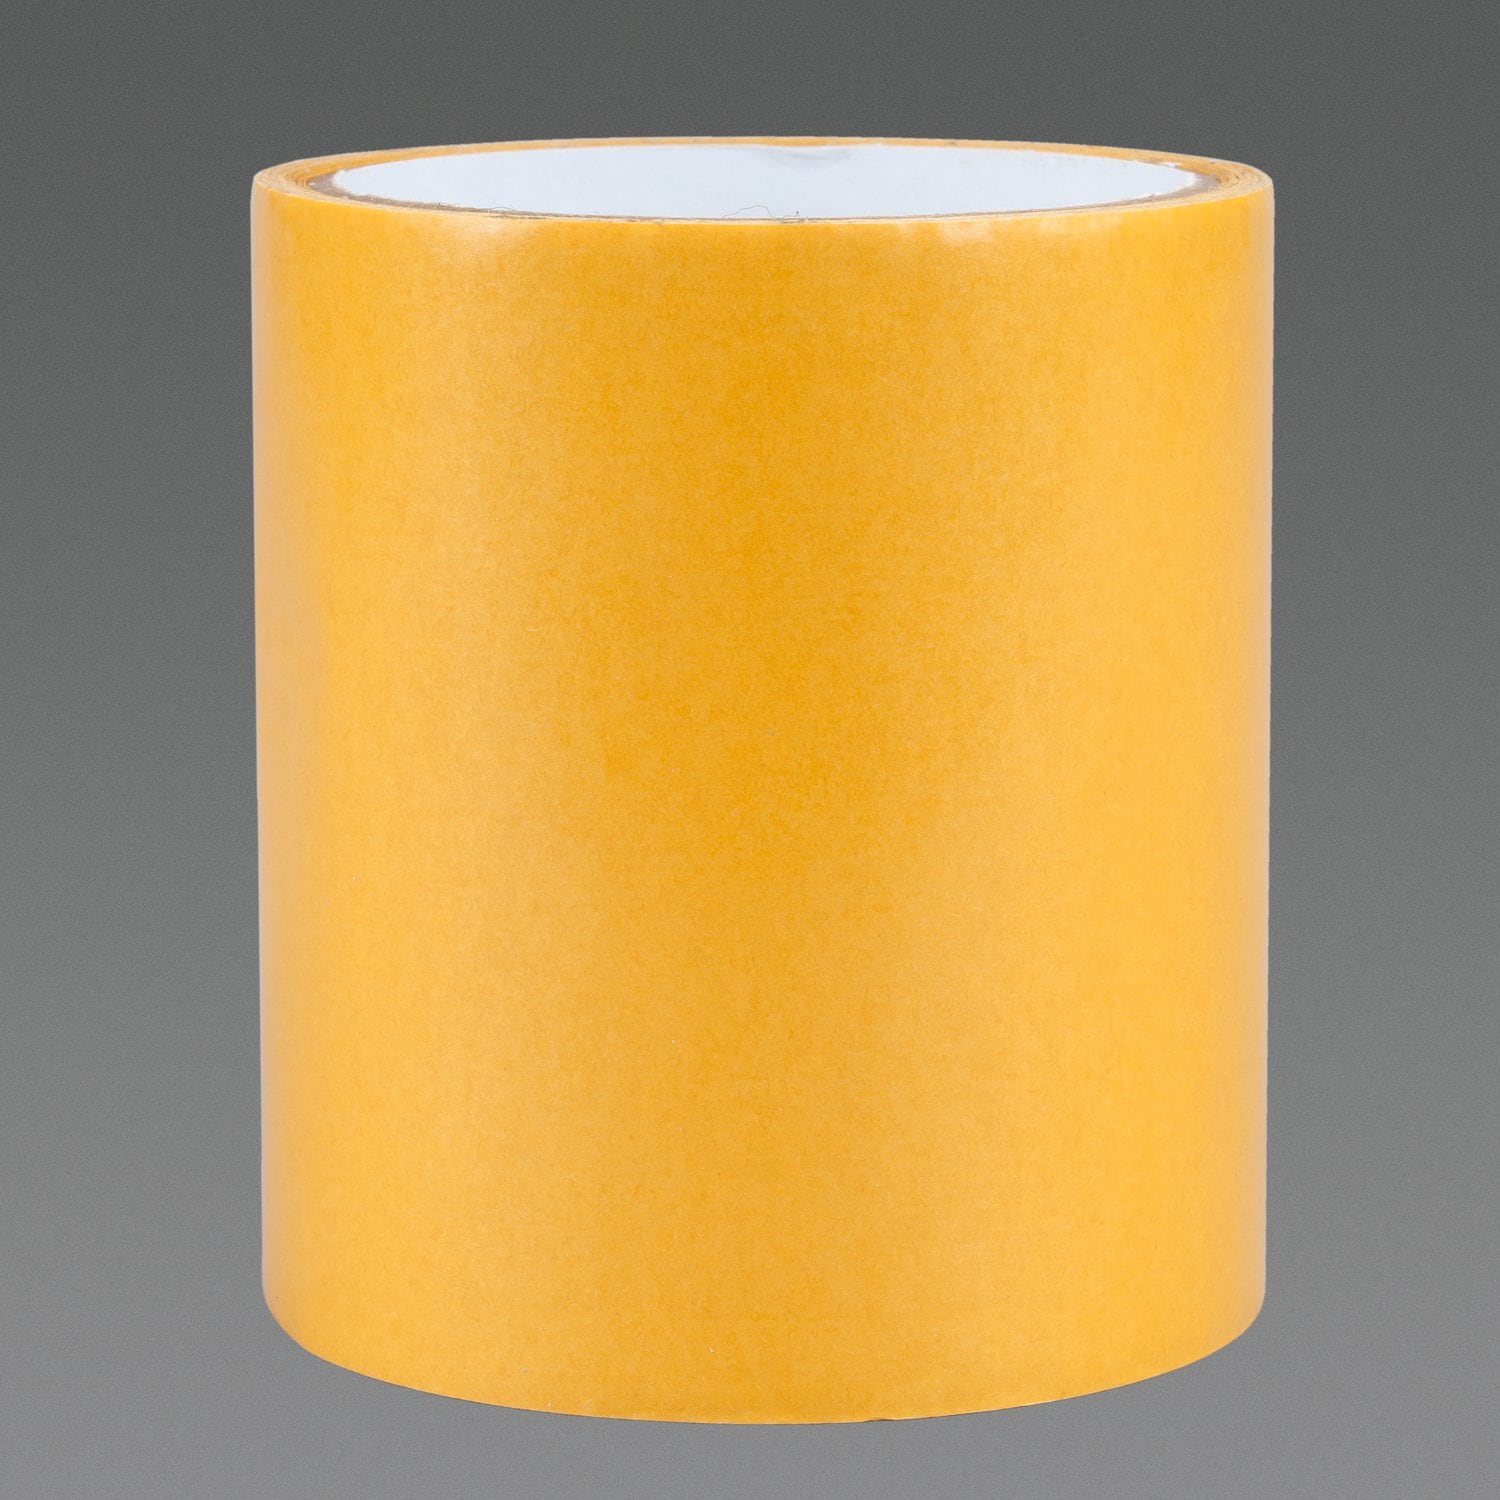 7100073750 - 3M Scrim Reinforced Adhesive Transfer Tape 97053, Clear, 56 in, 2.5
mil, Roll, Config